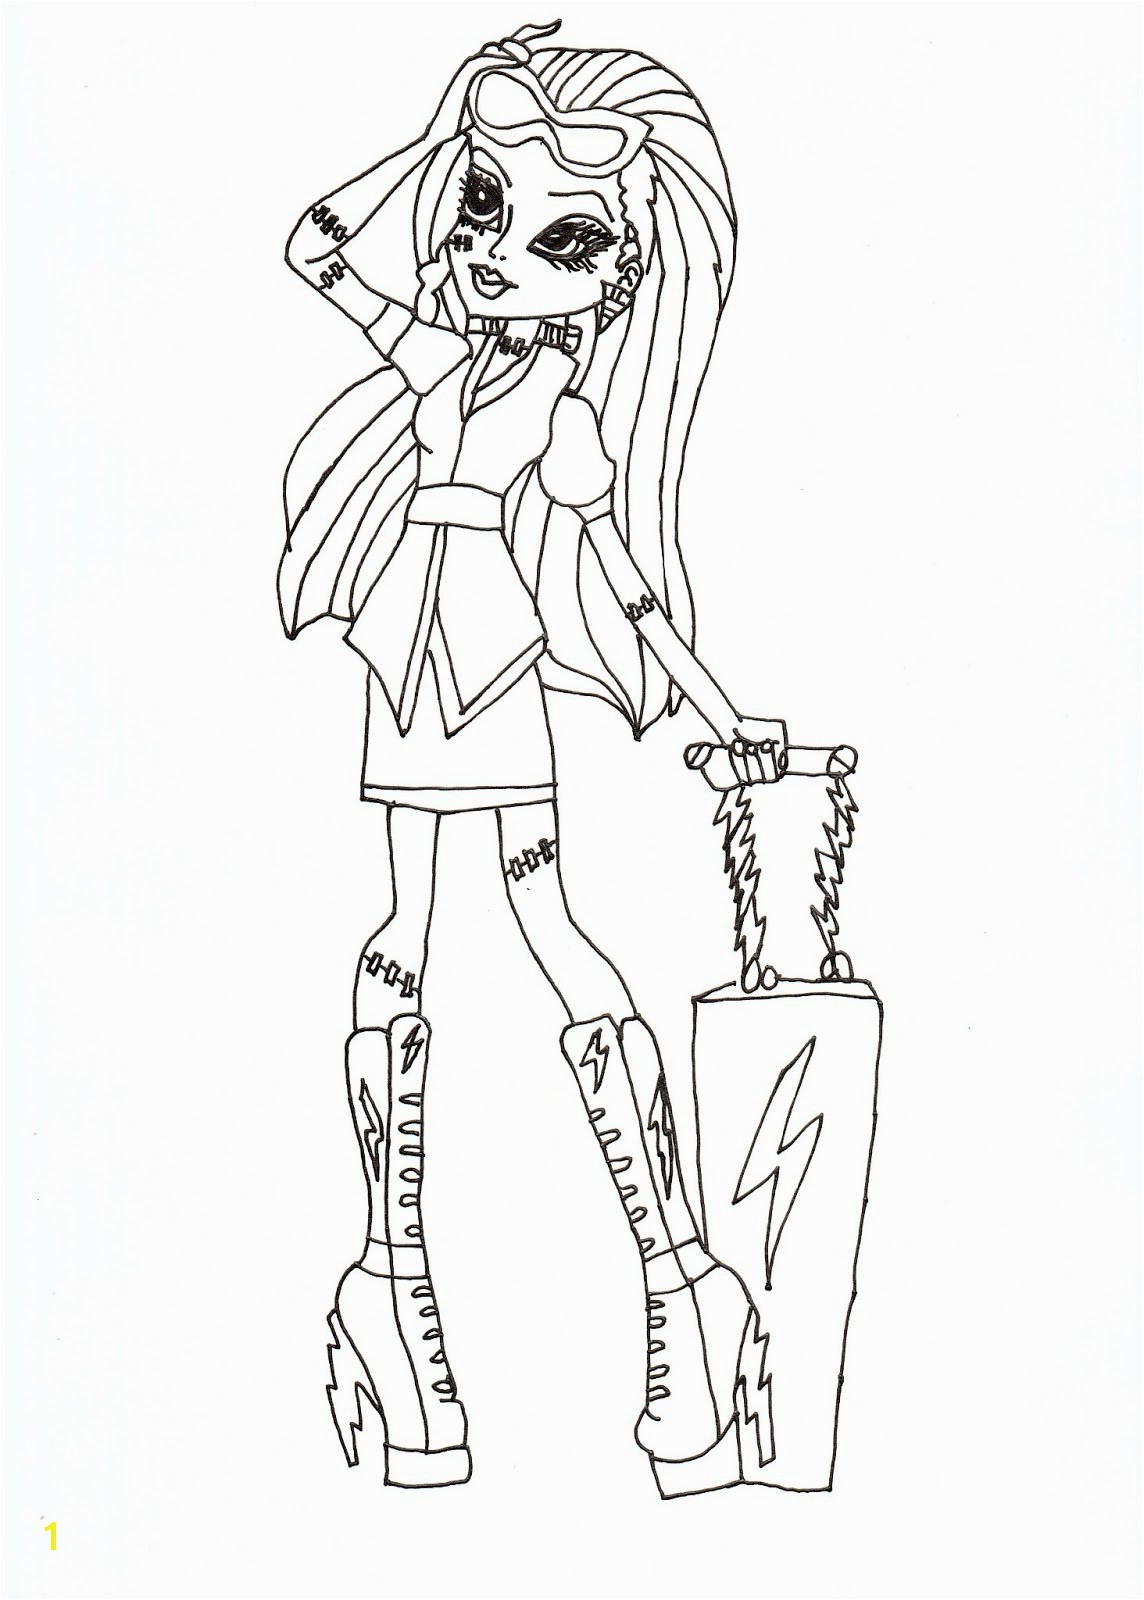 Monster High Printable Coloring Pages Monster High Printable Coloring Pages Monster High Coloring Pagefree